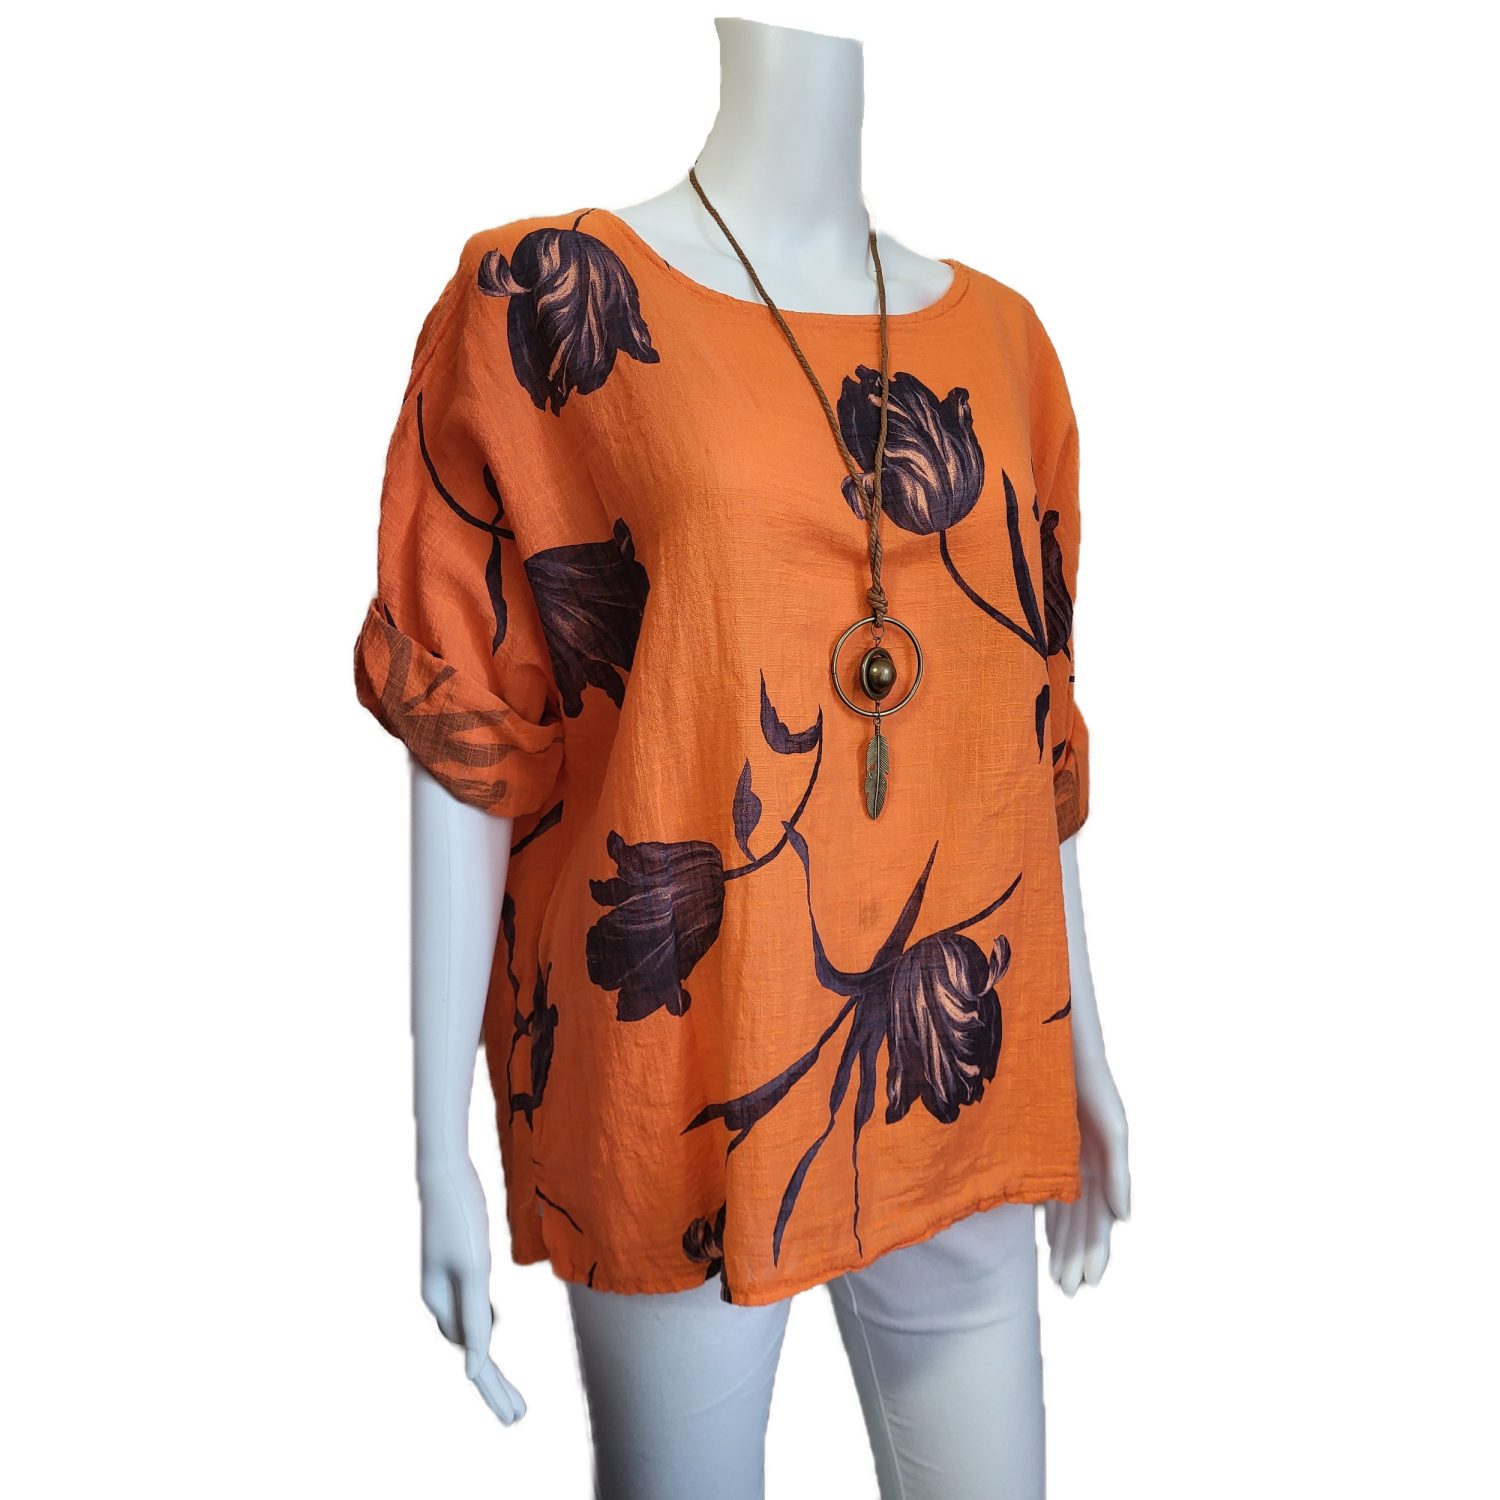 orange top with navy floral pattern adn free necklace